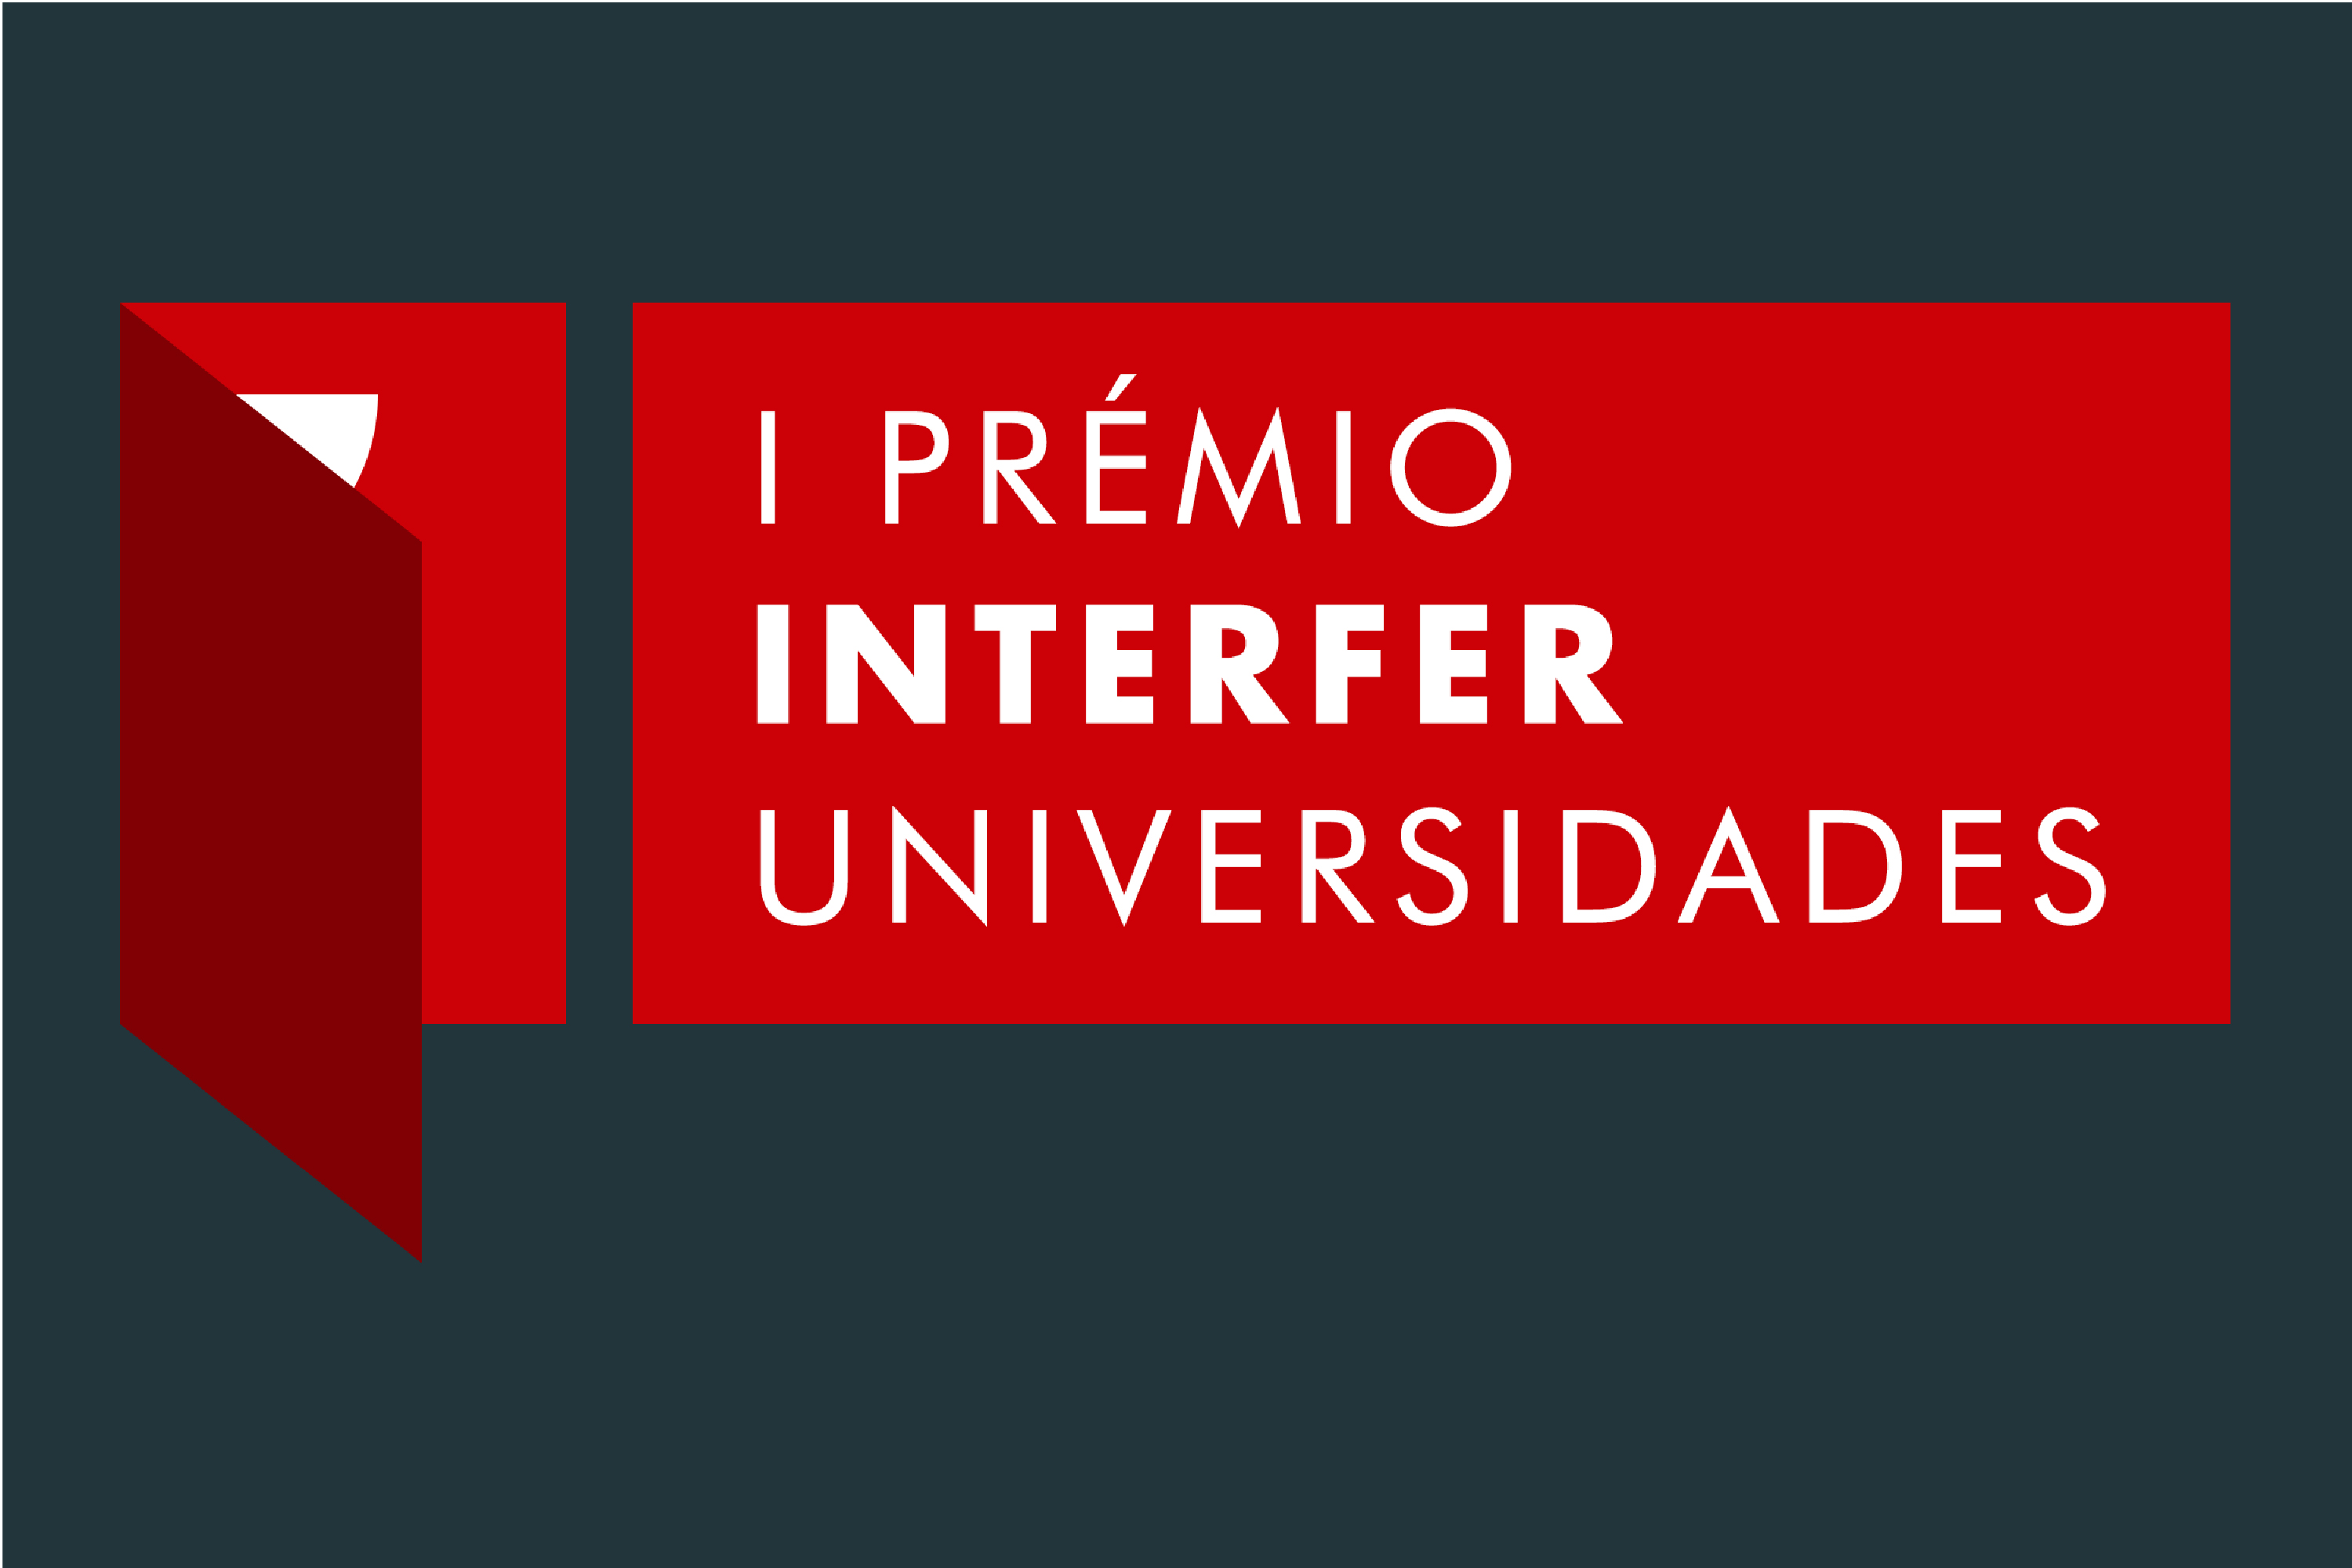 Ceremony of the 1st Interfer Universities Prize